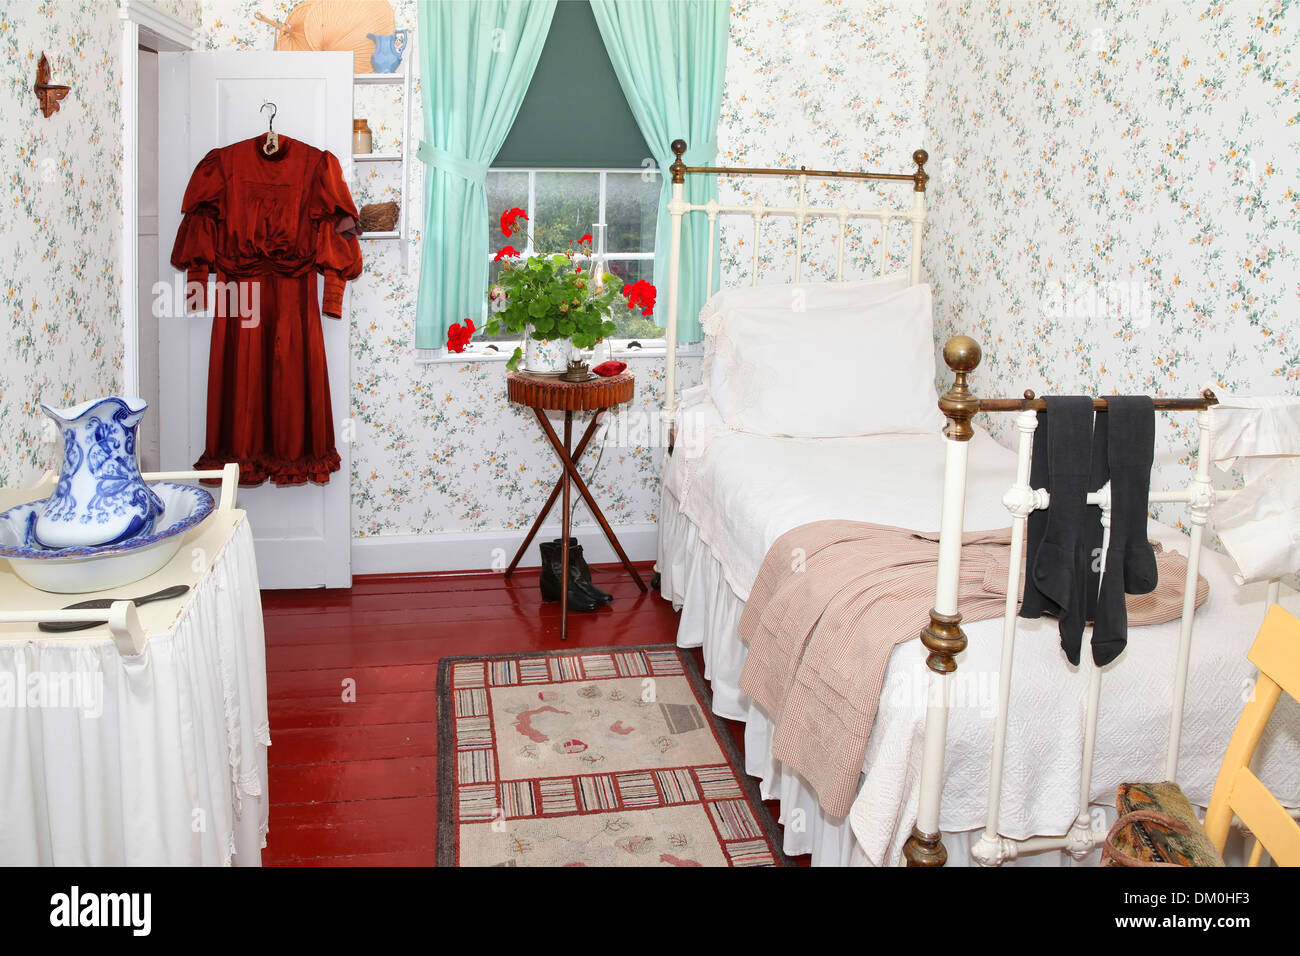 Anne's bedroom in Green Gables House on Prince Edward Island. Made famous in the book 'Anne of Green Gables' by L M Montgomery. Stock Photo